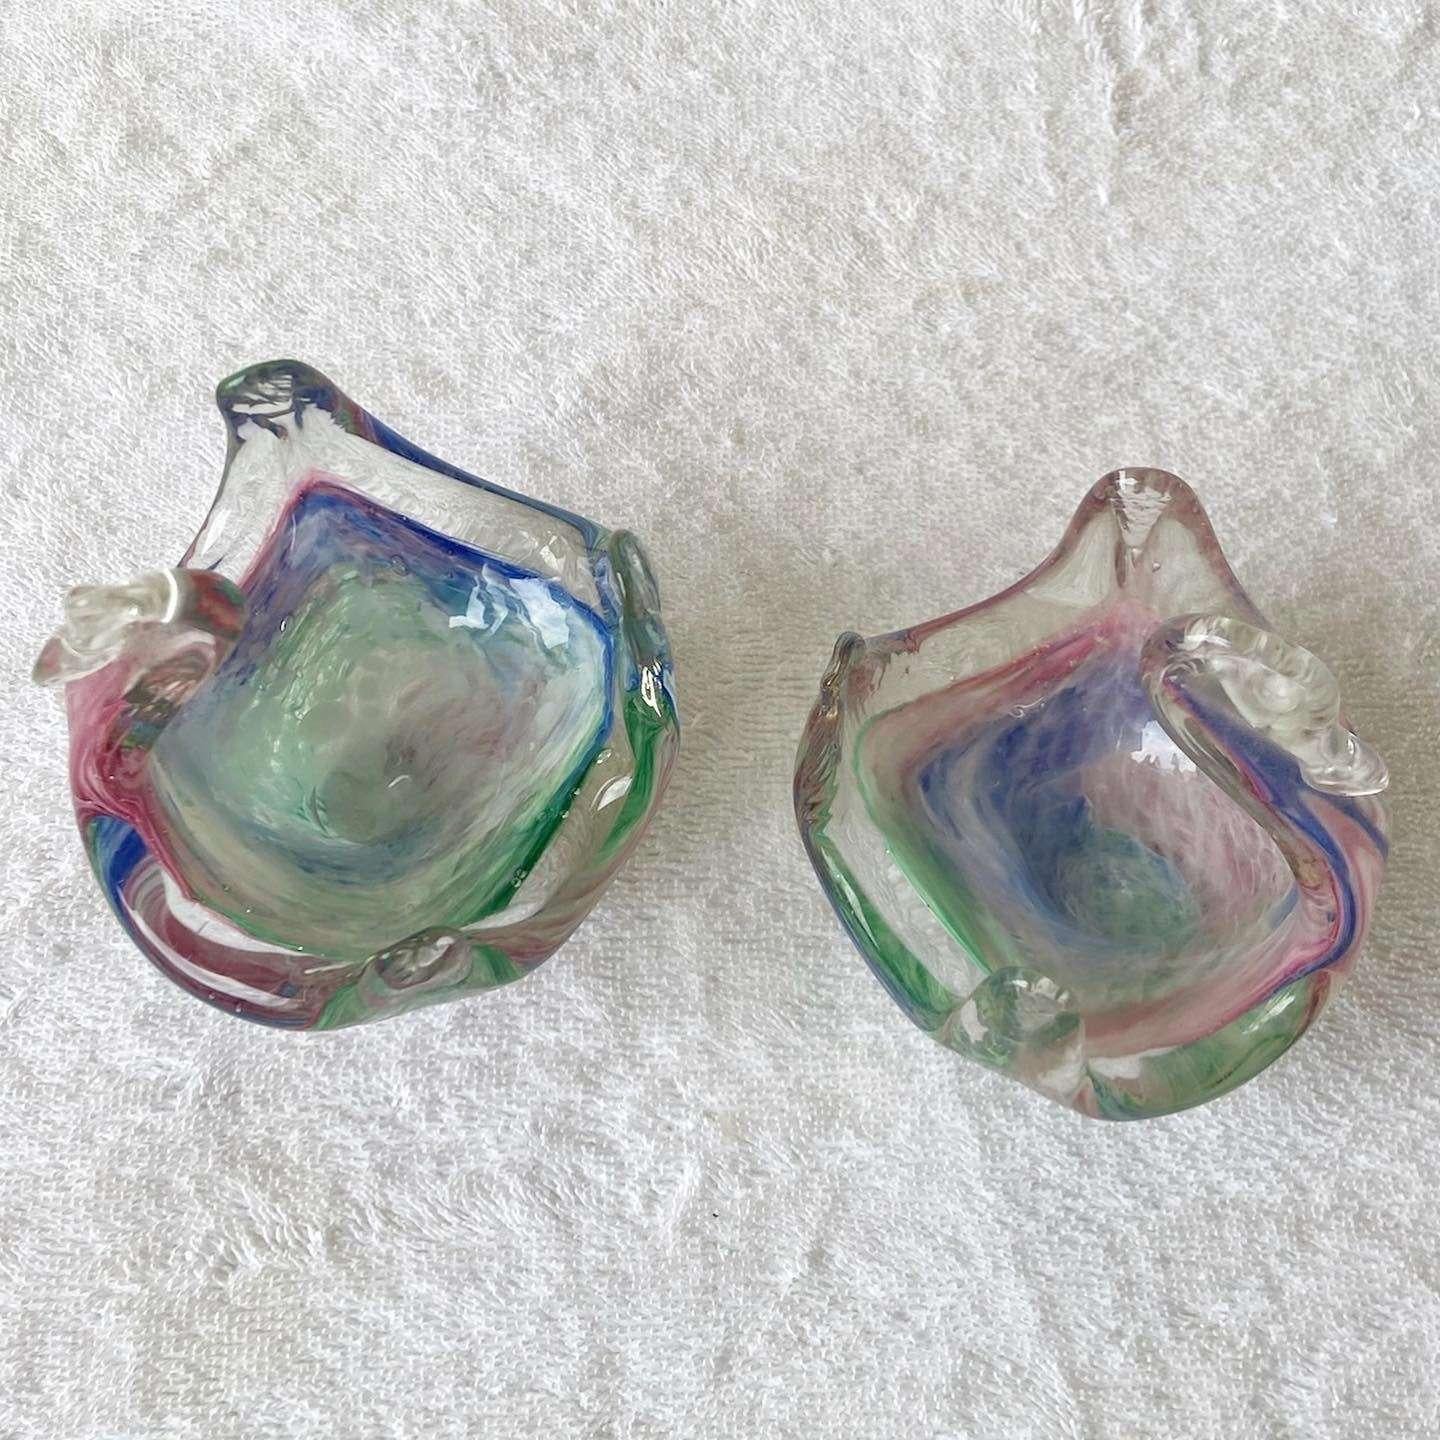 Late 20th Century Postmodern Glass Swan Decorative Candy Dishes - a Pair For Sale